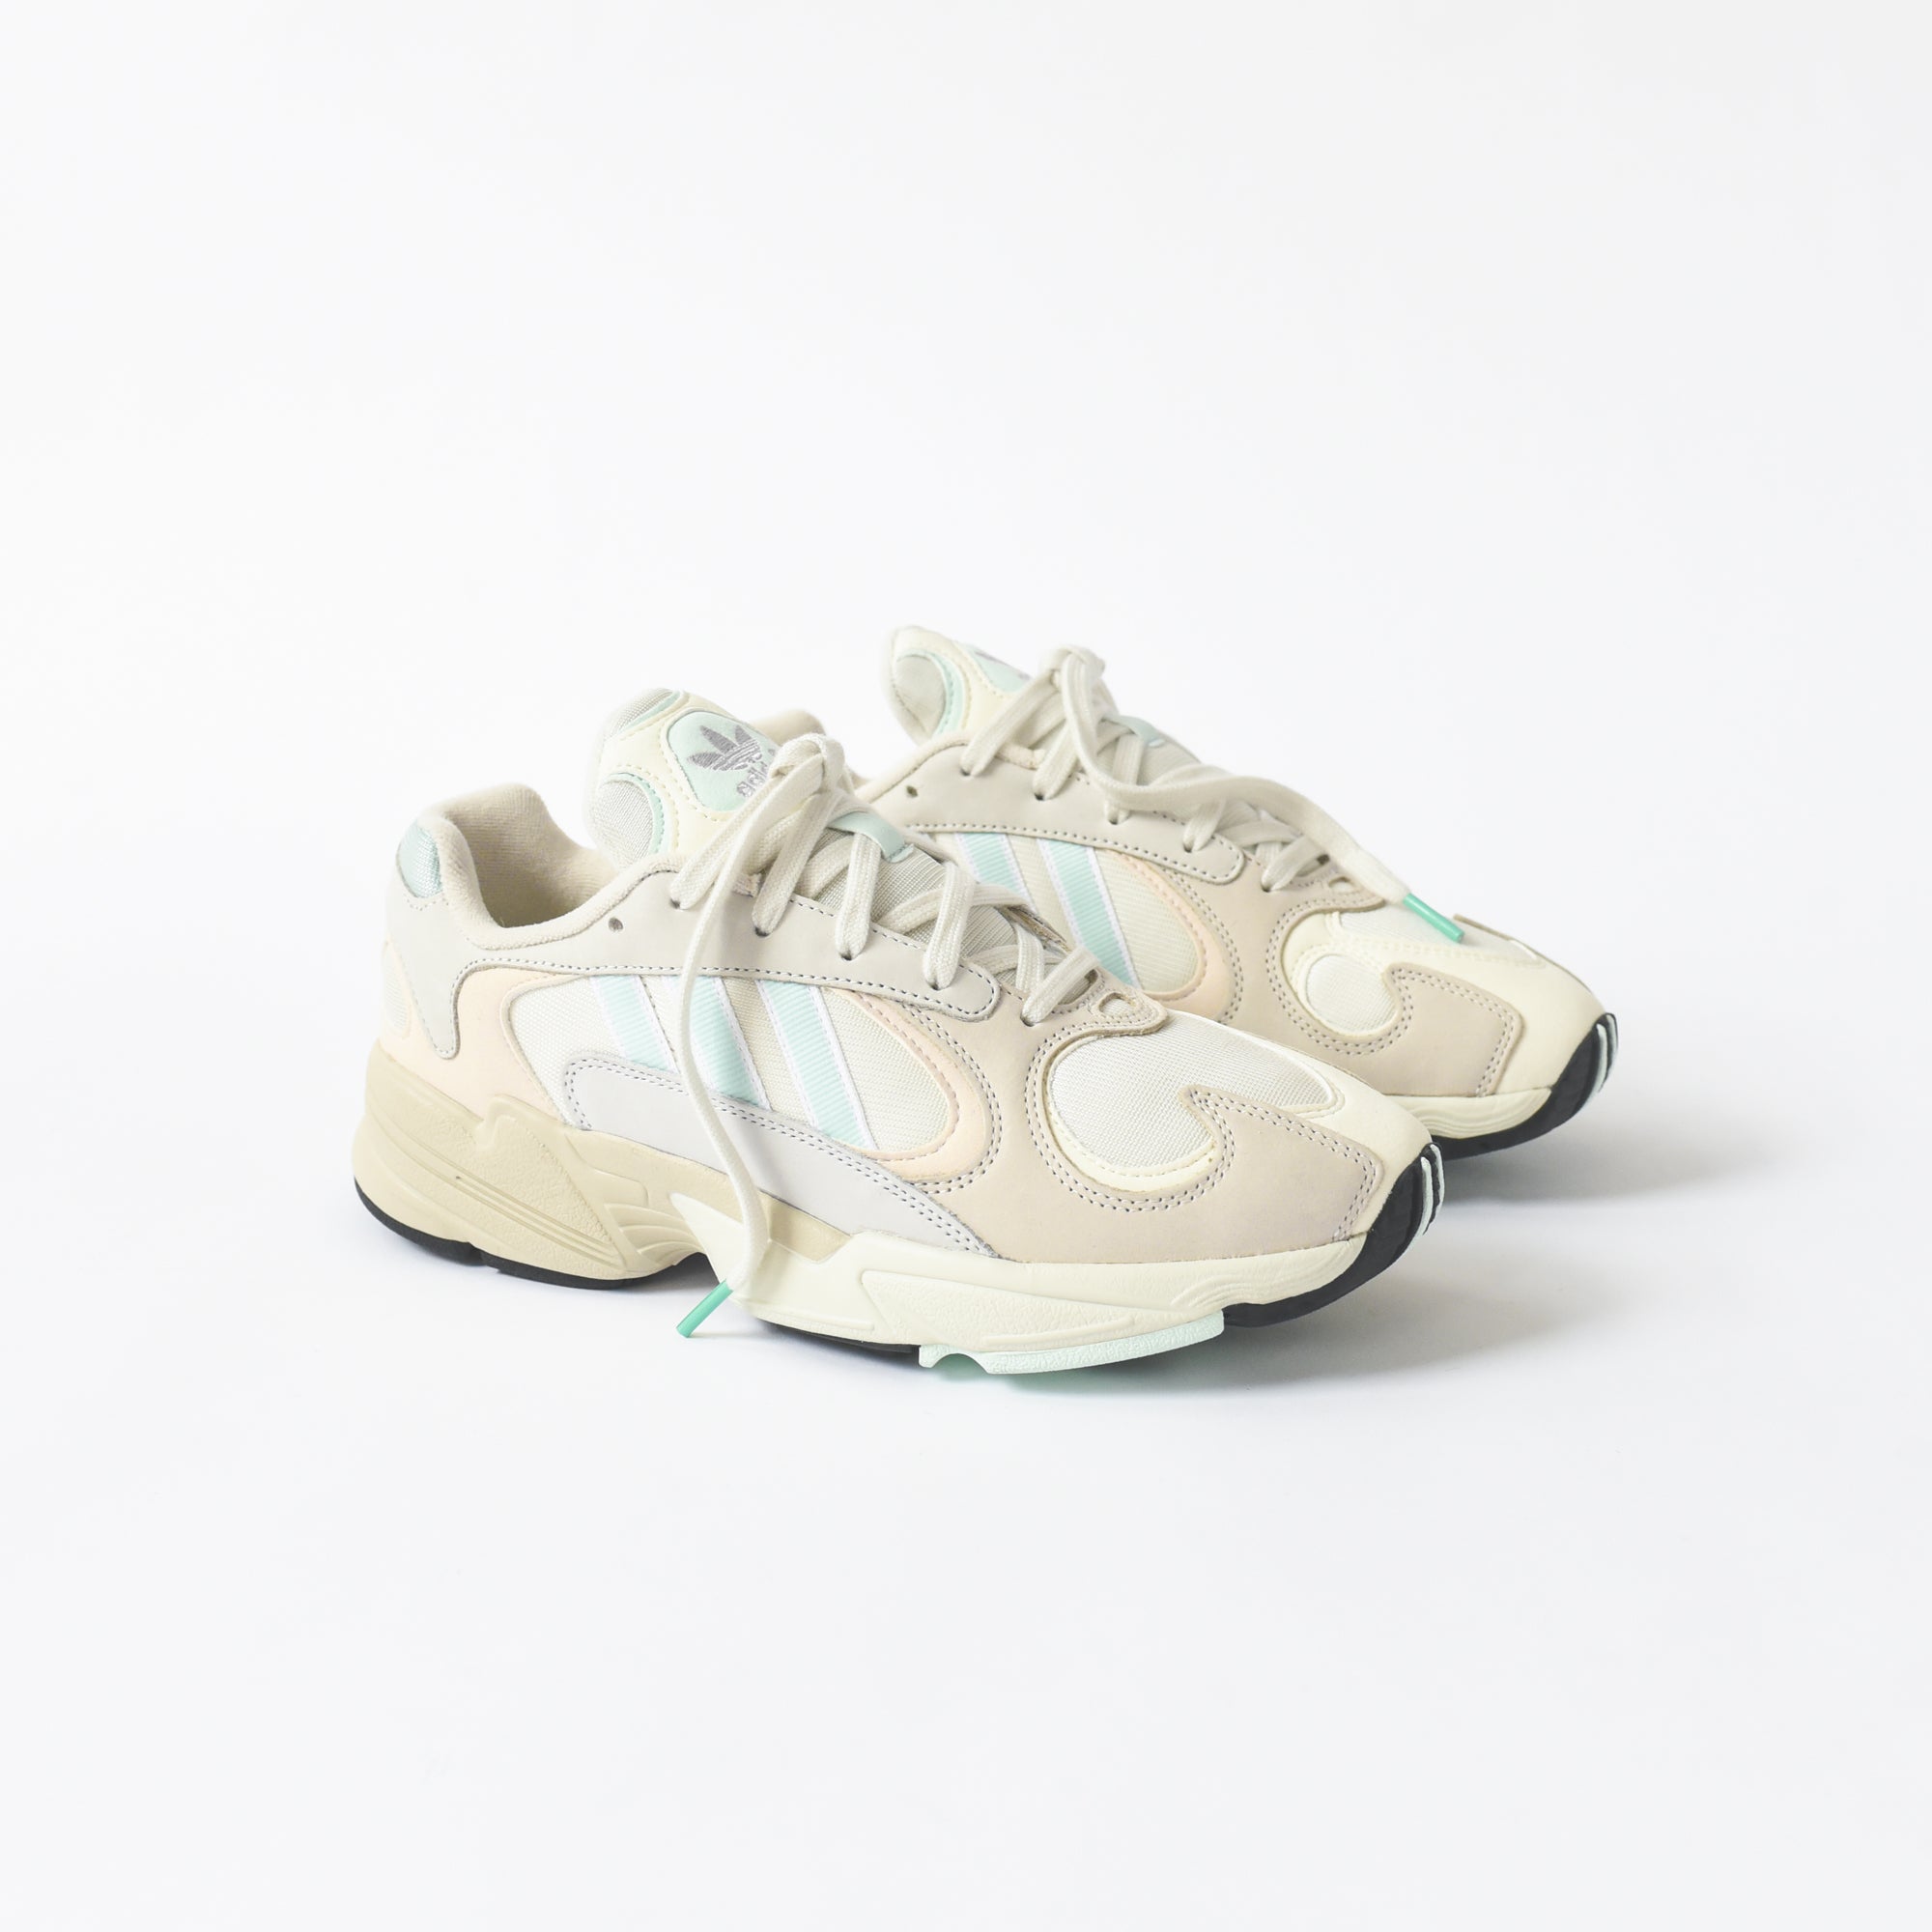 adidas Originals Yung-1 - Off White / Ice Mint Kith